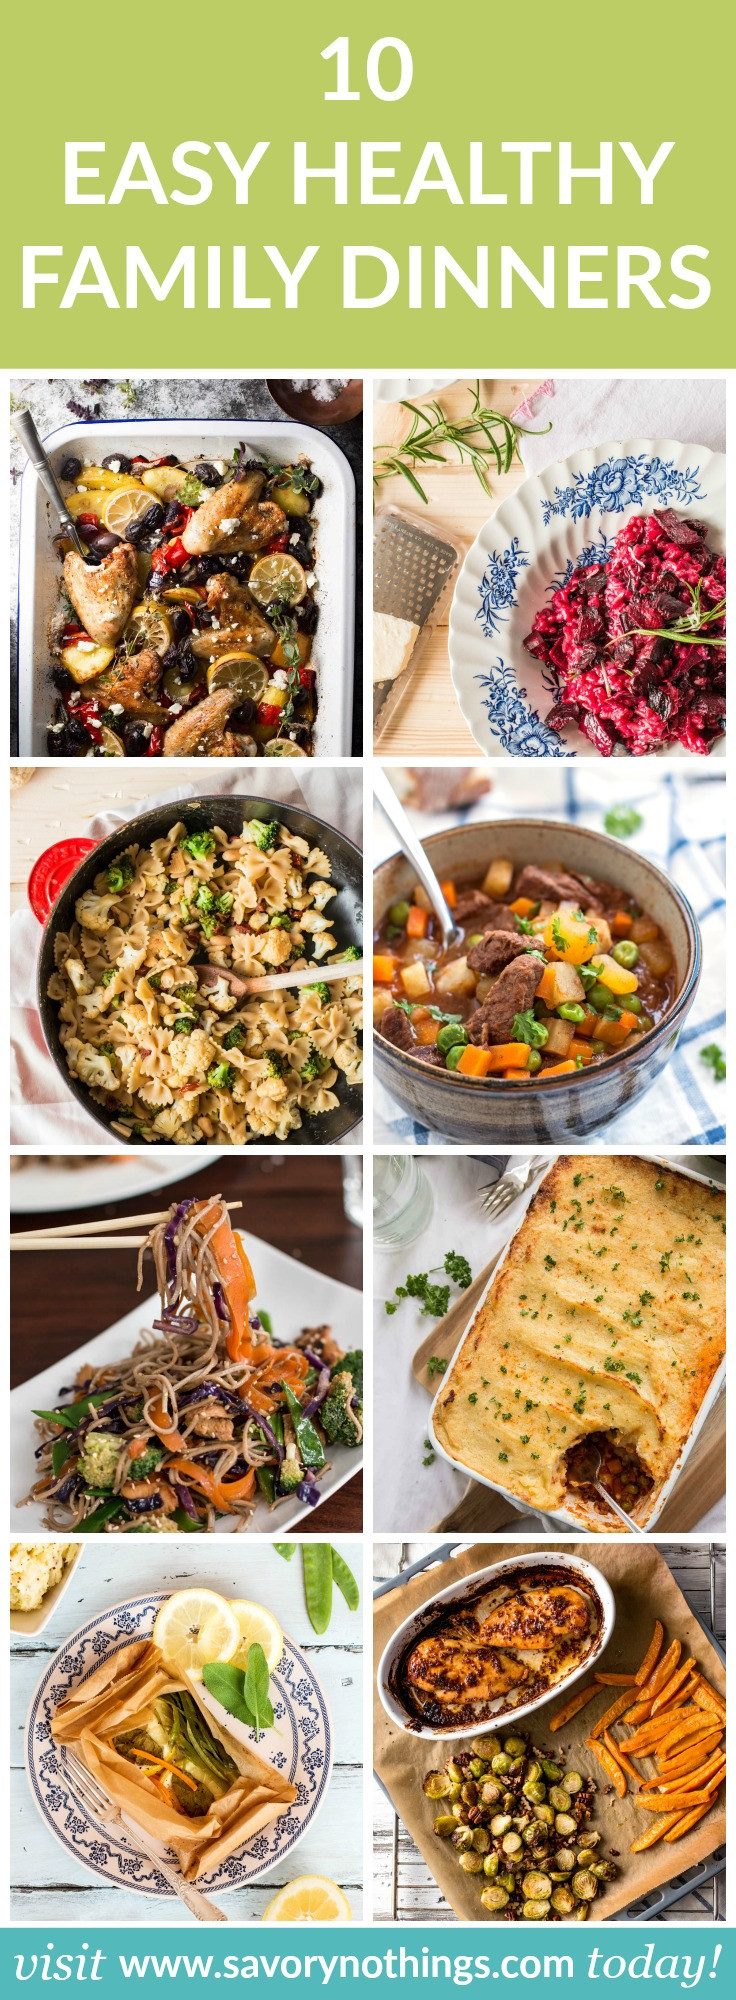 Easy Healthy Family Dinners
 10 Healthy Family Dinners Easy Recipes for Busy Weeknights